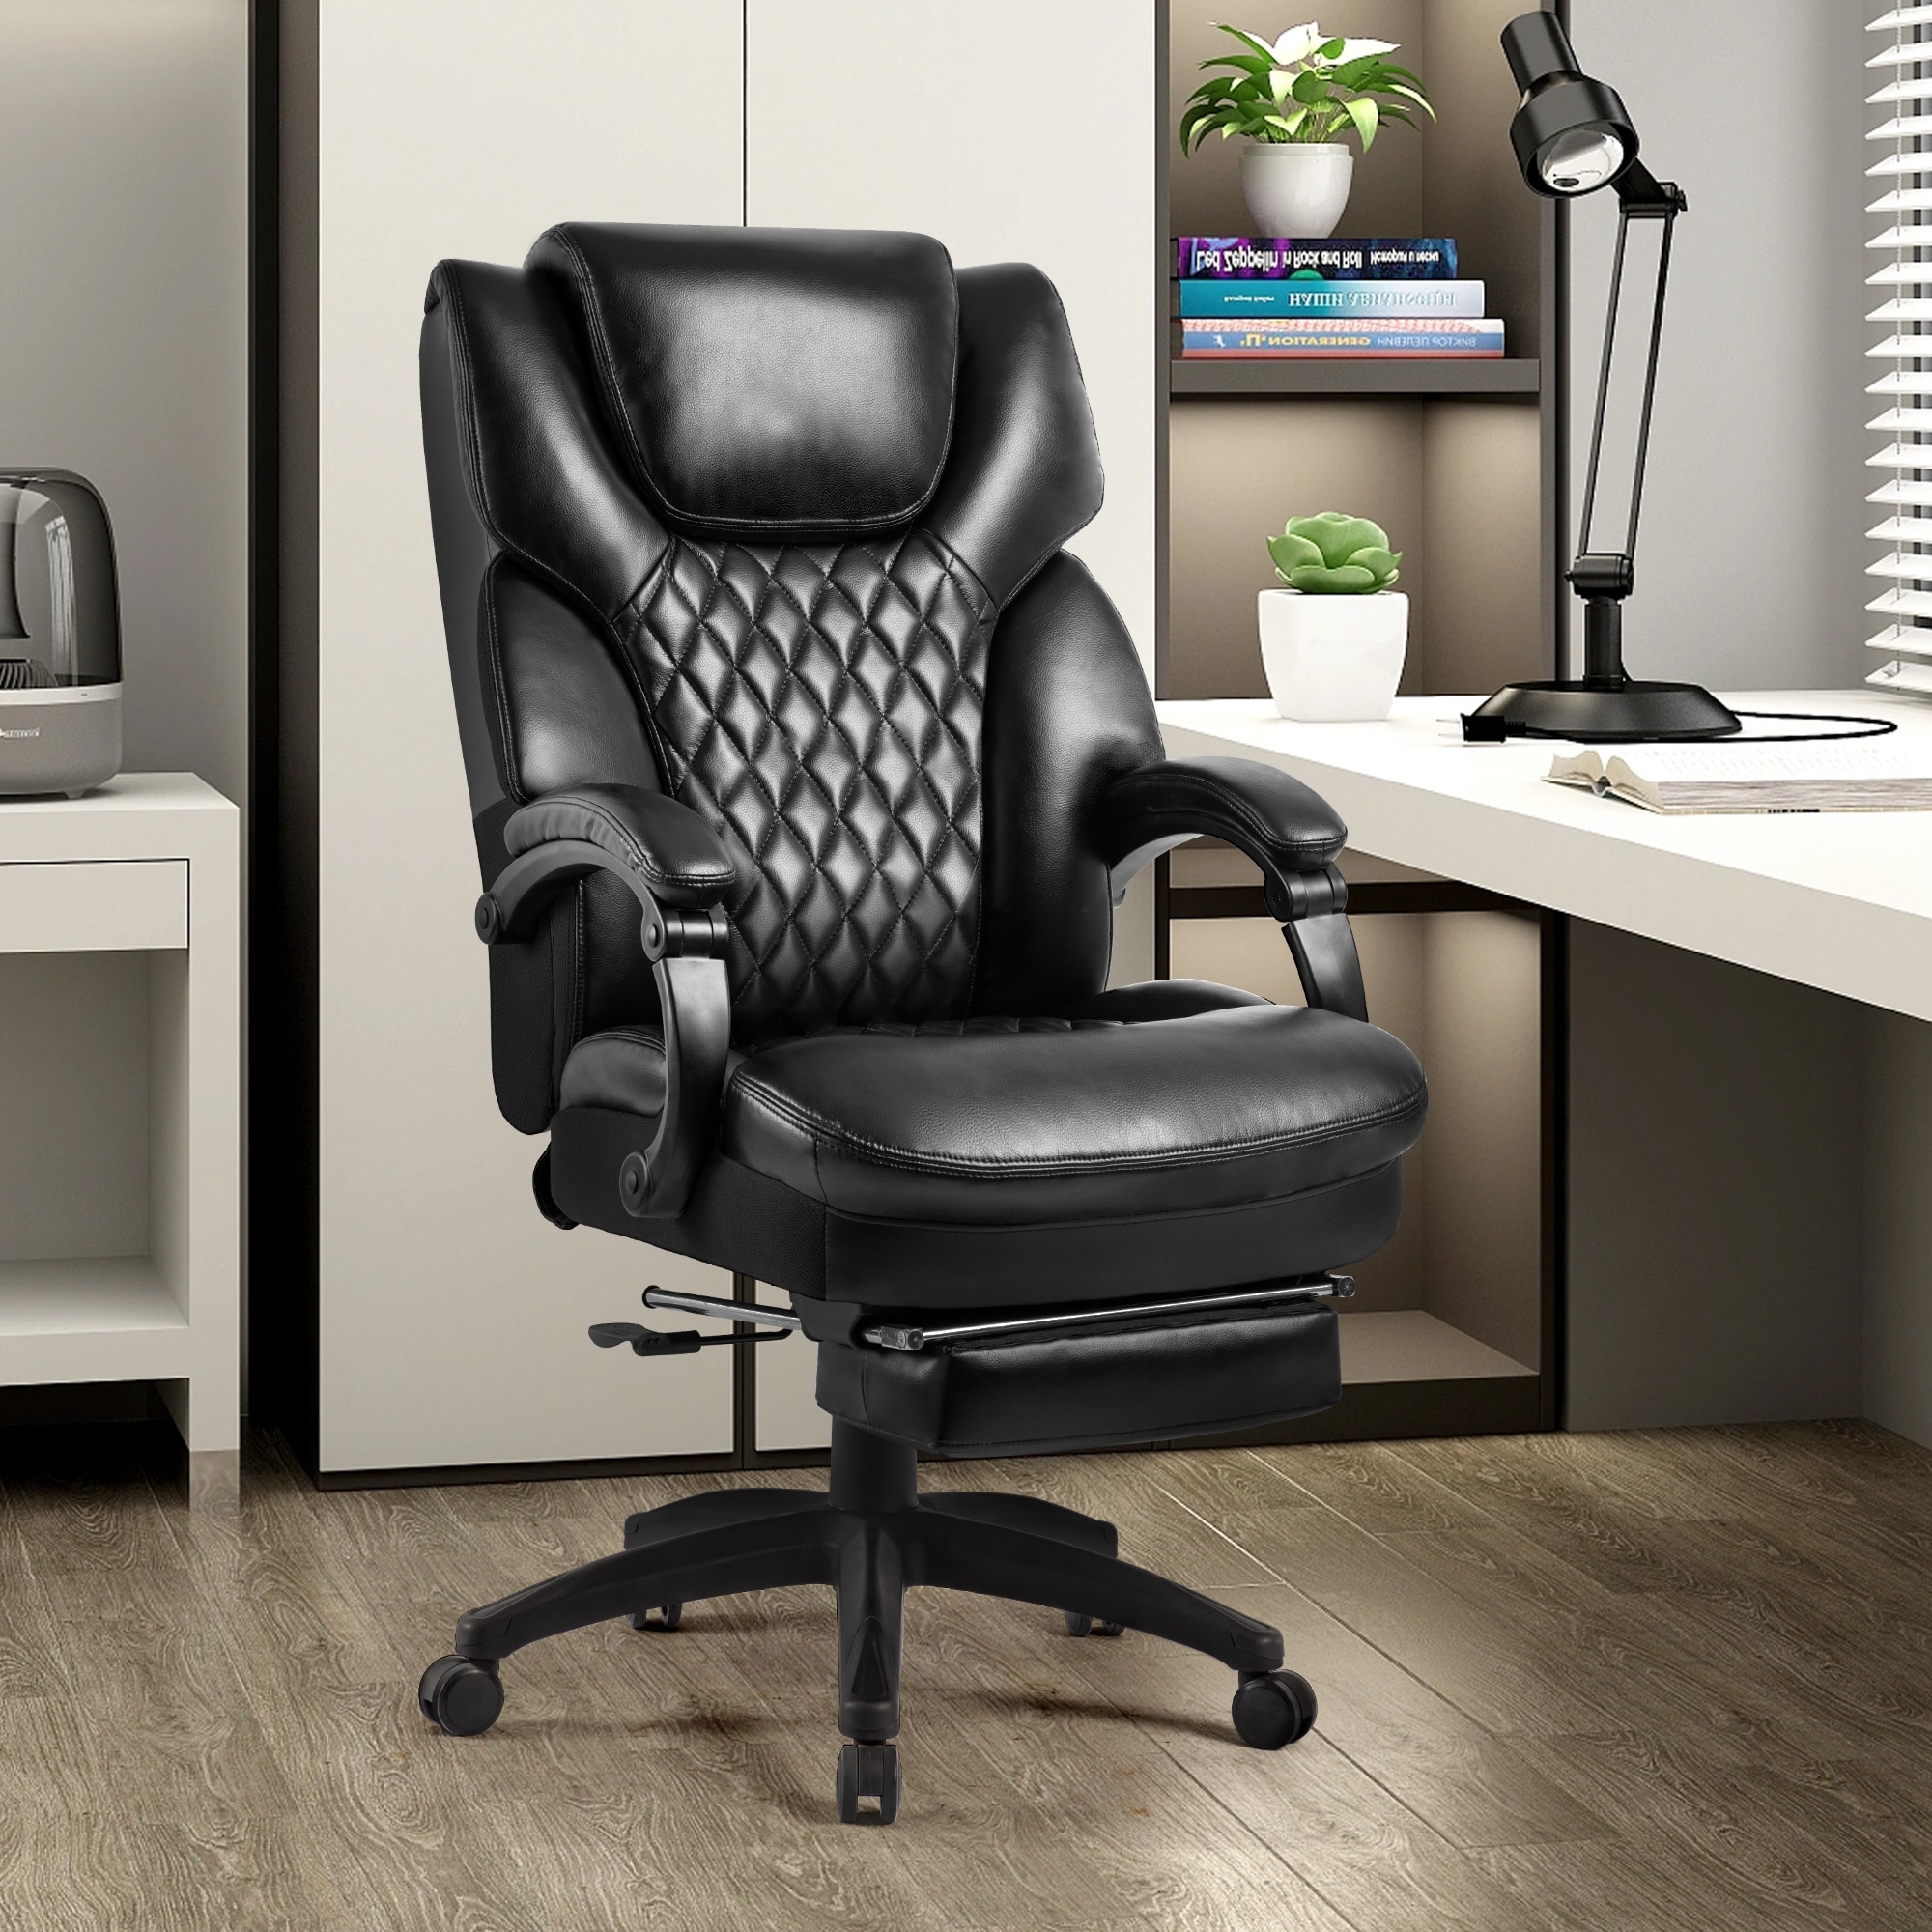 https://ak1.ostkcdn.com/images/products/is/images/direct/06e22e4f0cadf598ddfb2631daad681e29d489cf/High-Back-Big-%26-Tall-400lb-Office-Chair-with-Footrest---Heavy-Duty-Base%2C-Ergonomic-Executive-Desk-Computer-Swivel-Chair.jpg